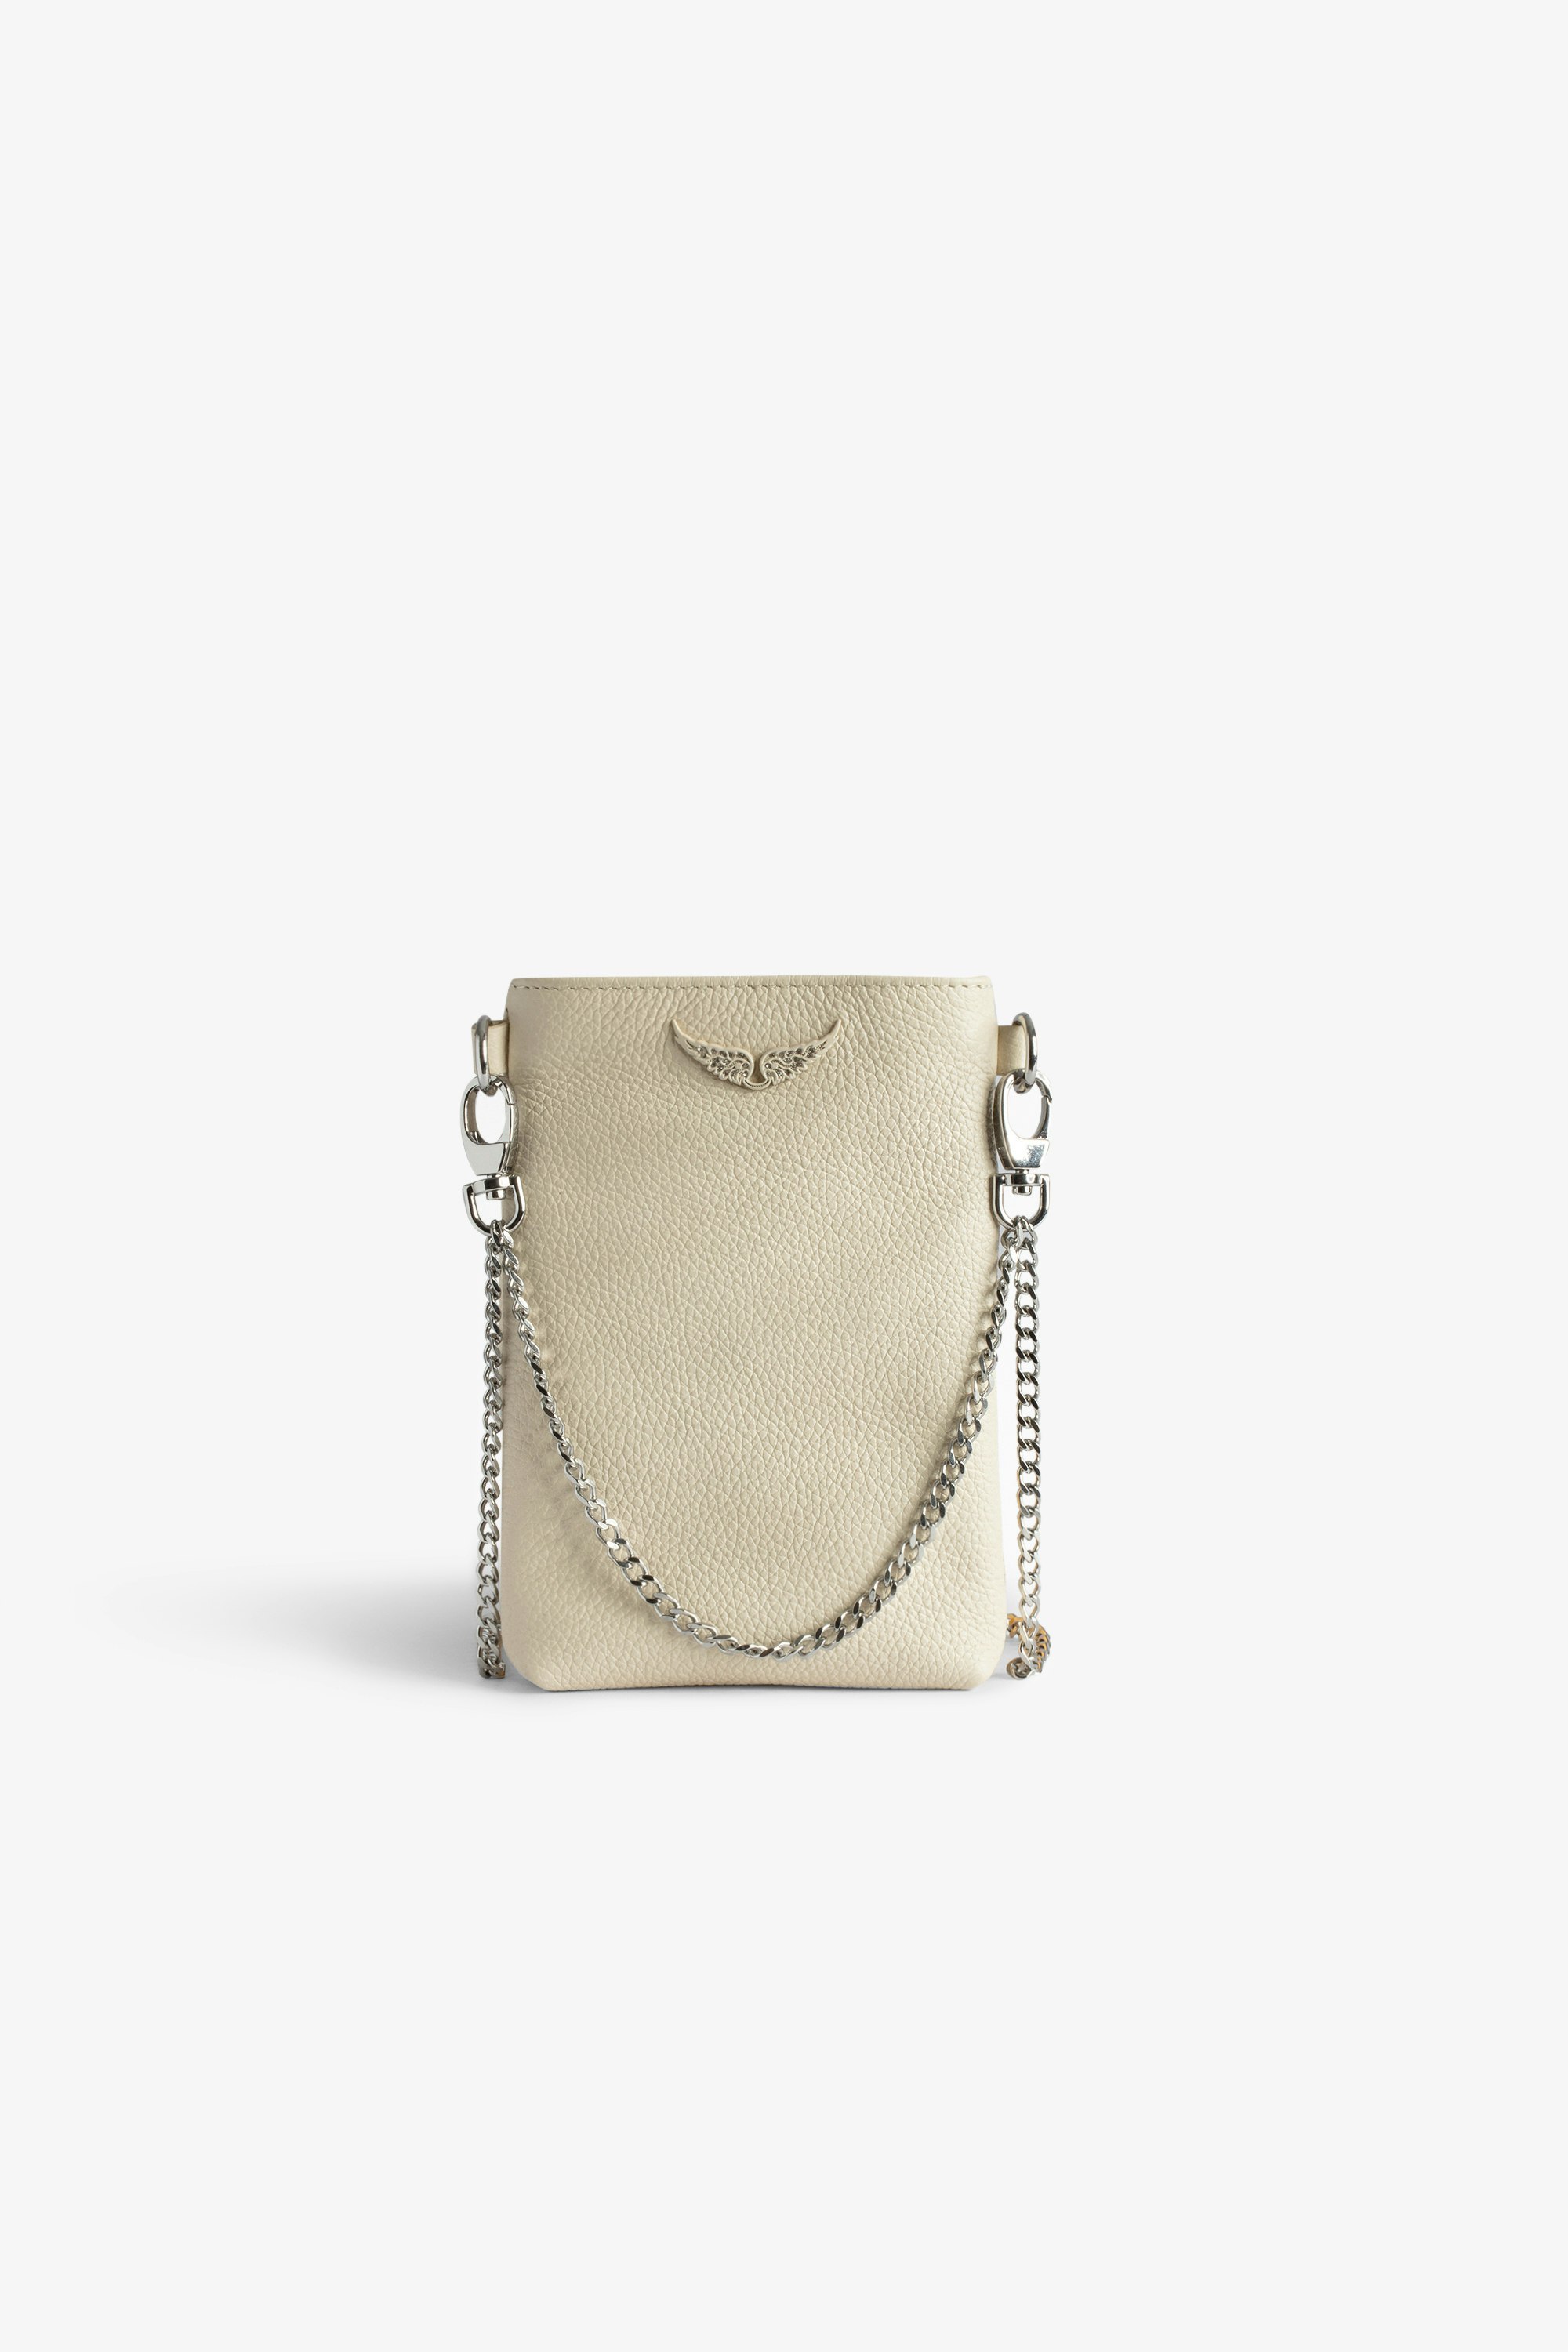 Rock Pouch Clutch - Women’s ecru grained leather phone pouch with chains and diamanté wings charm.